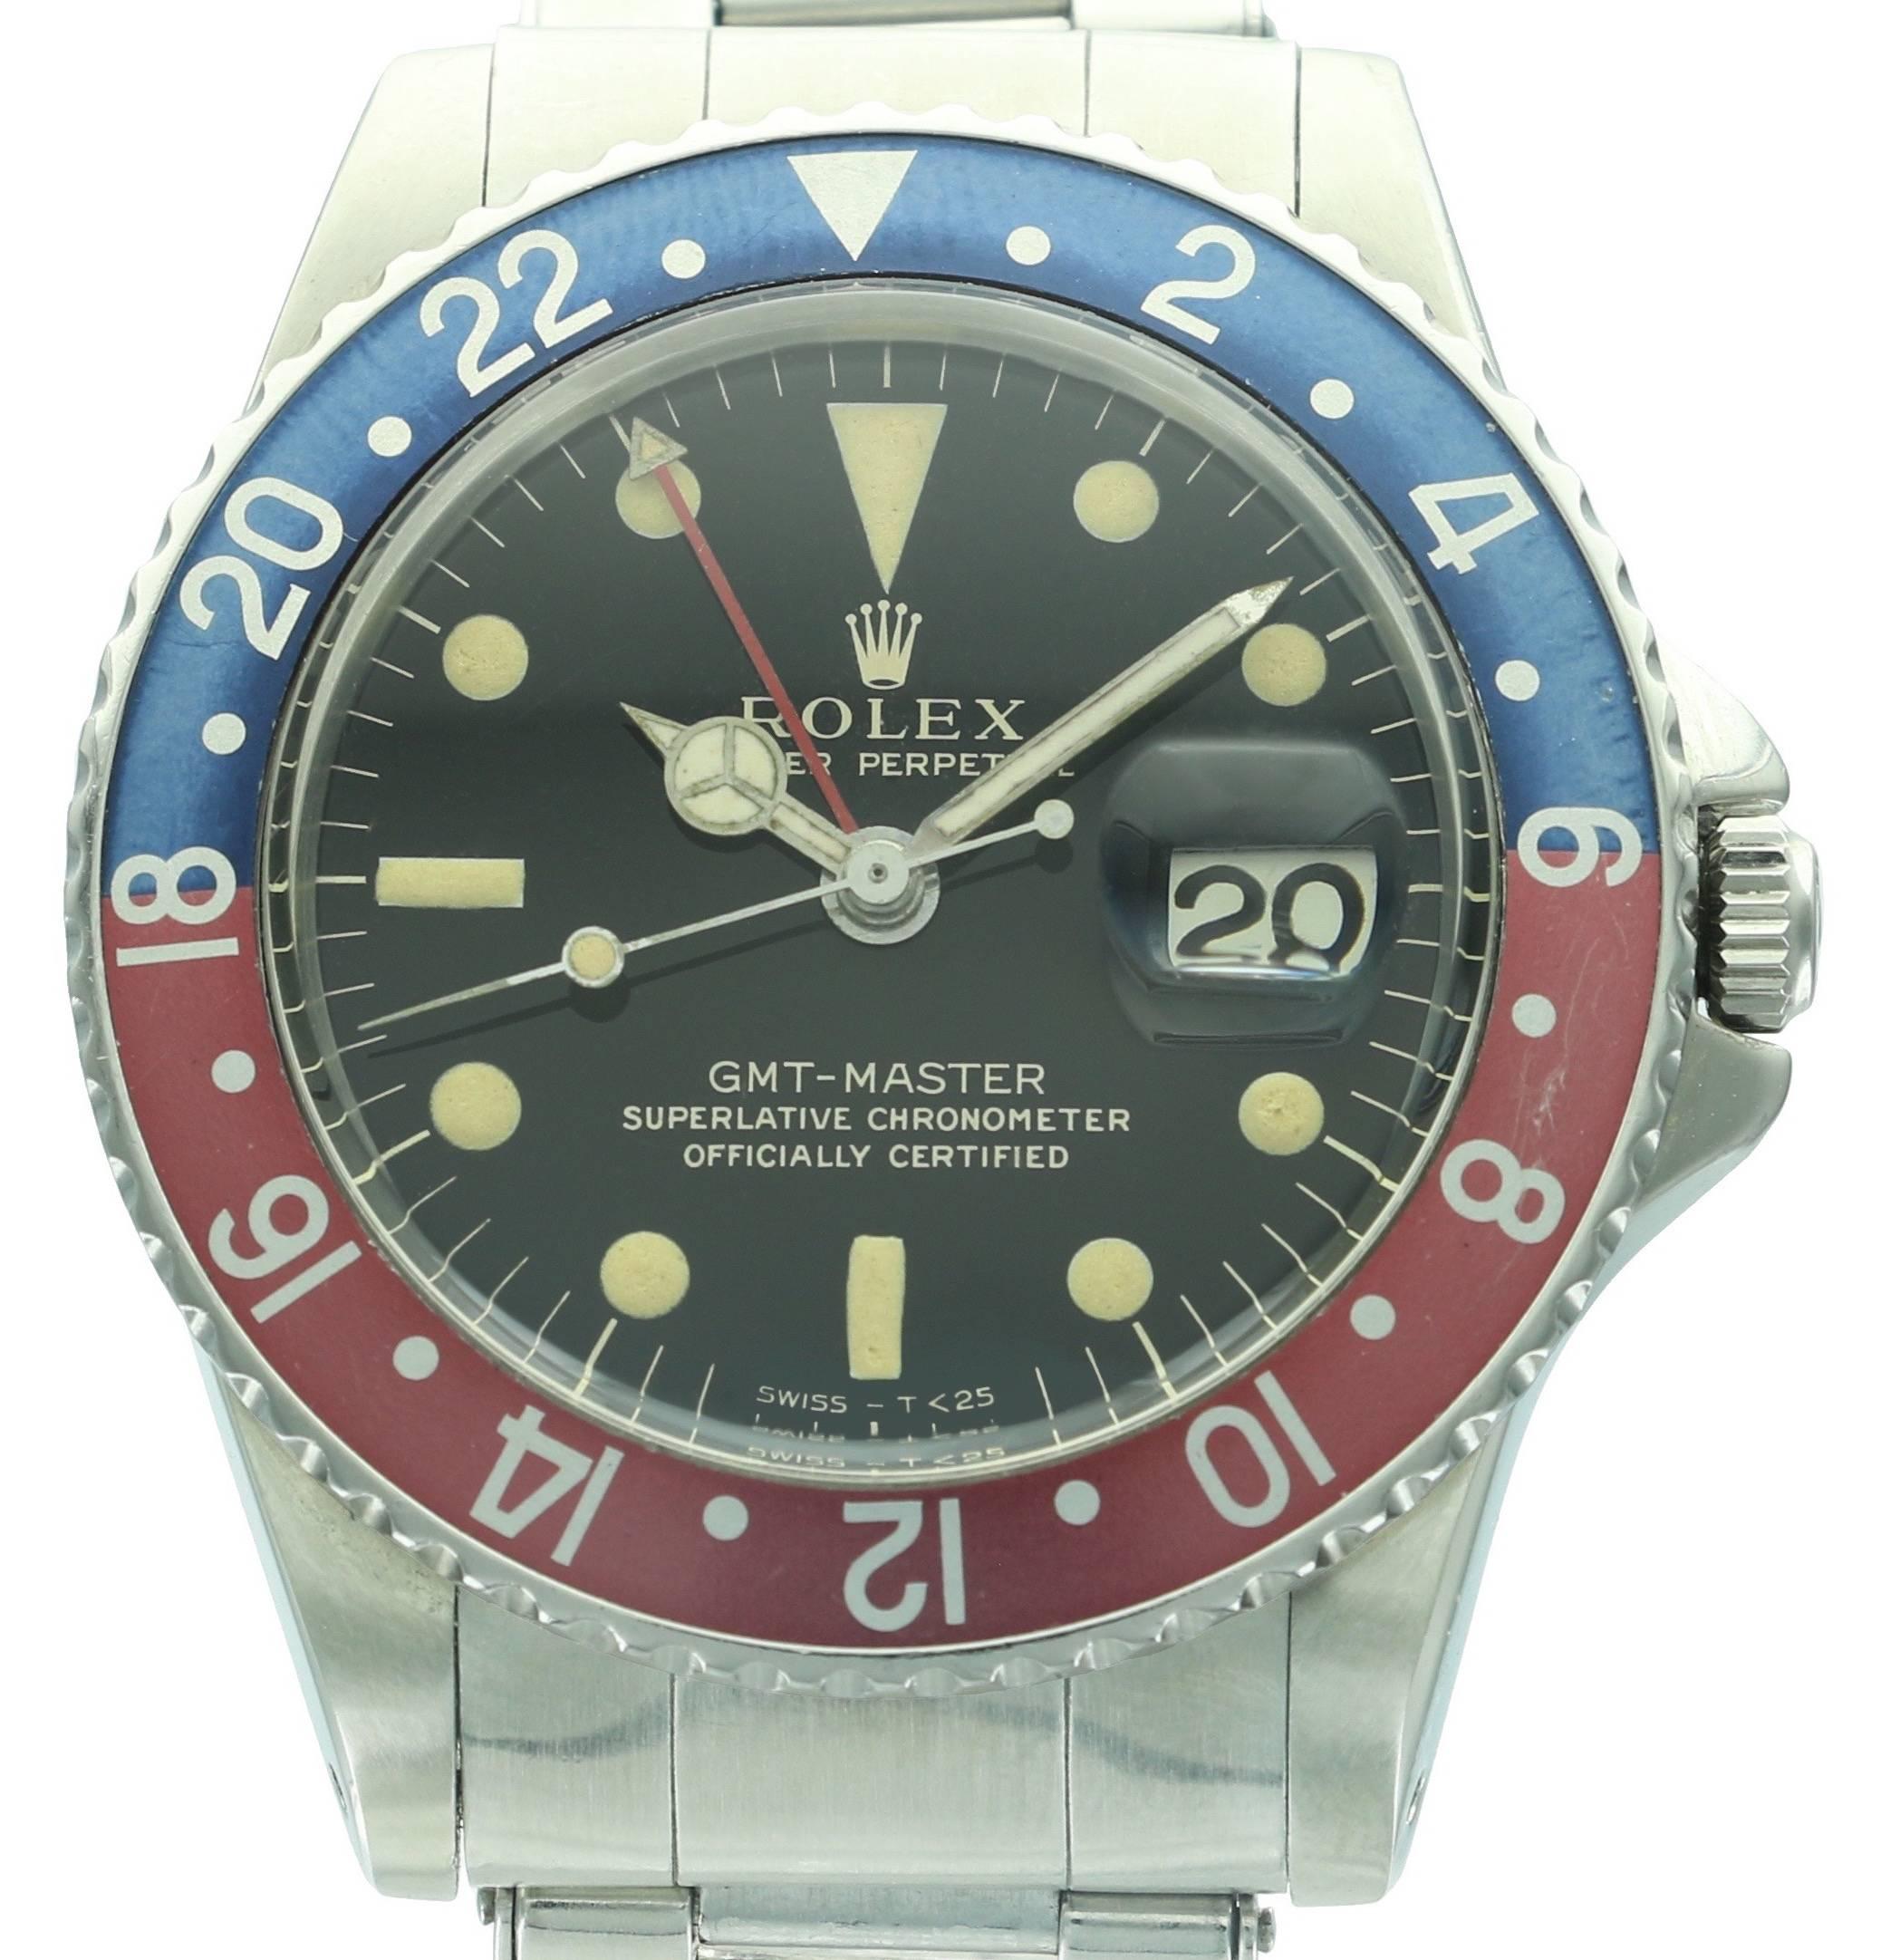 The GMT-Master is one of the pillars in the famous Rolex sport watch collection, alongside the Submariner and the Daytona. Easily identifiable with it’s two-colored bezel, the GMT-Master has become an icon among vintage watch collectors, with some